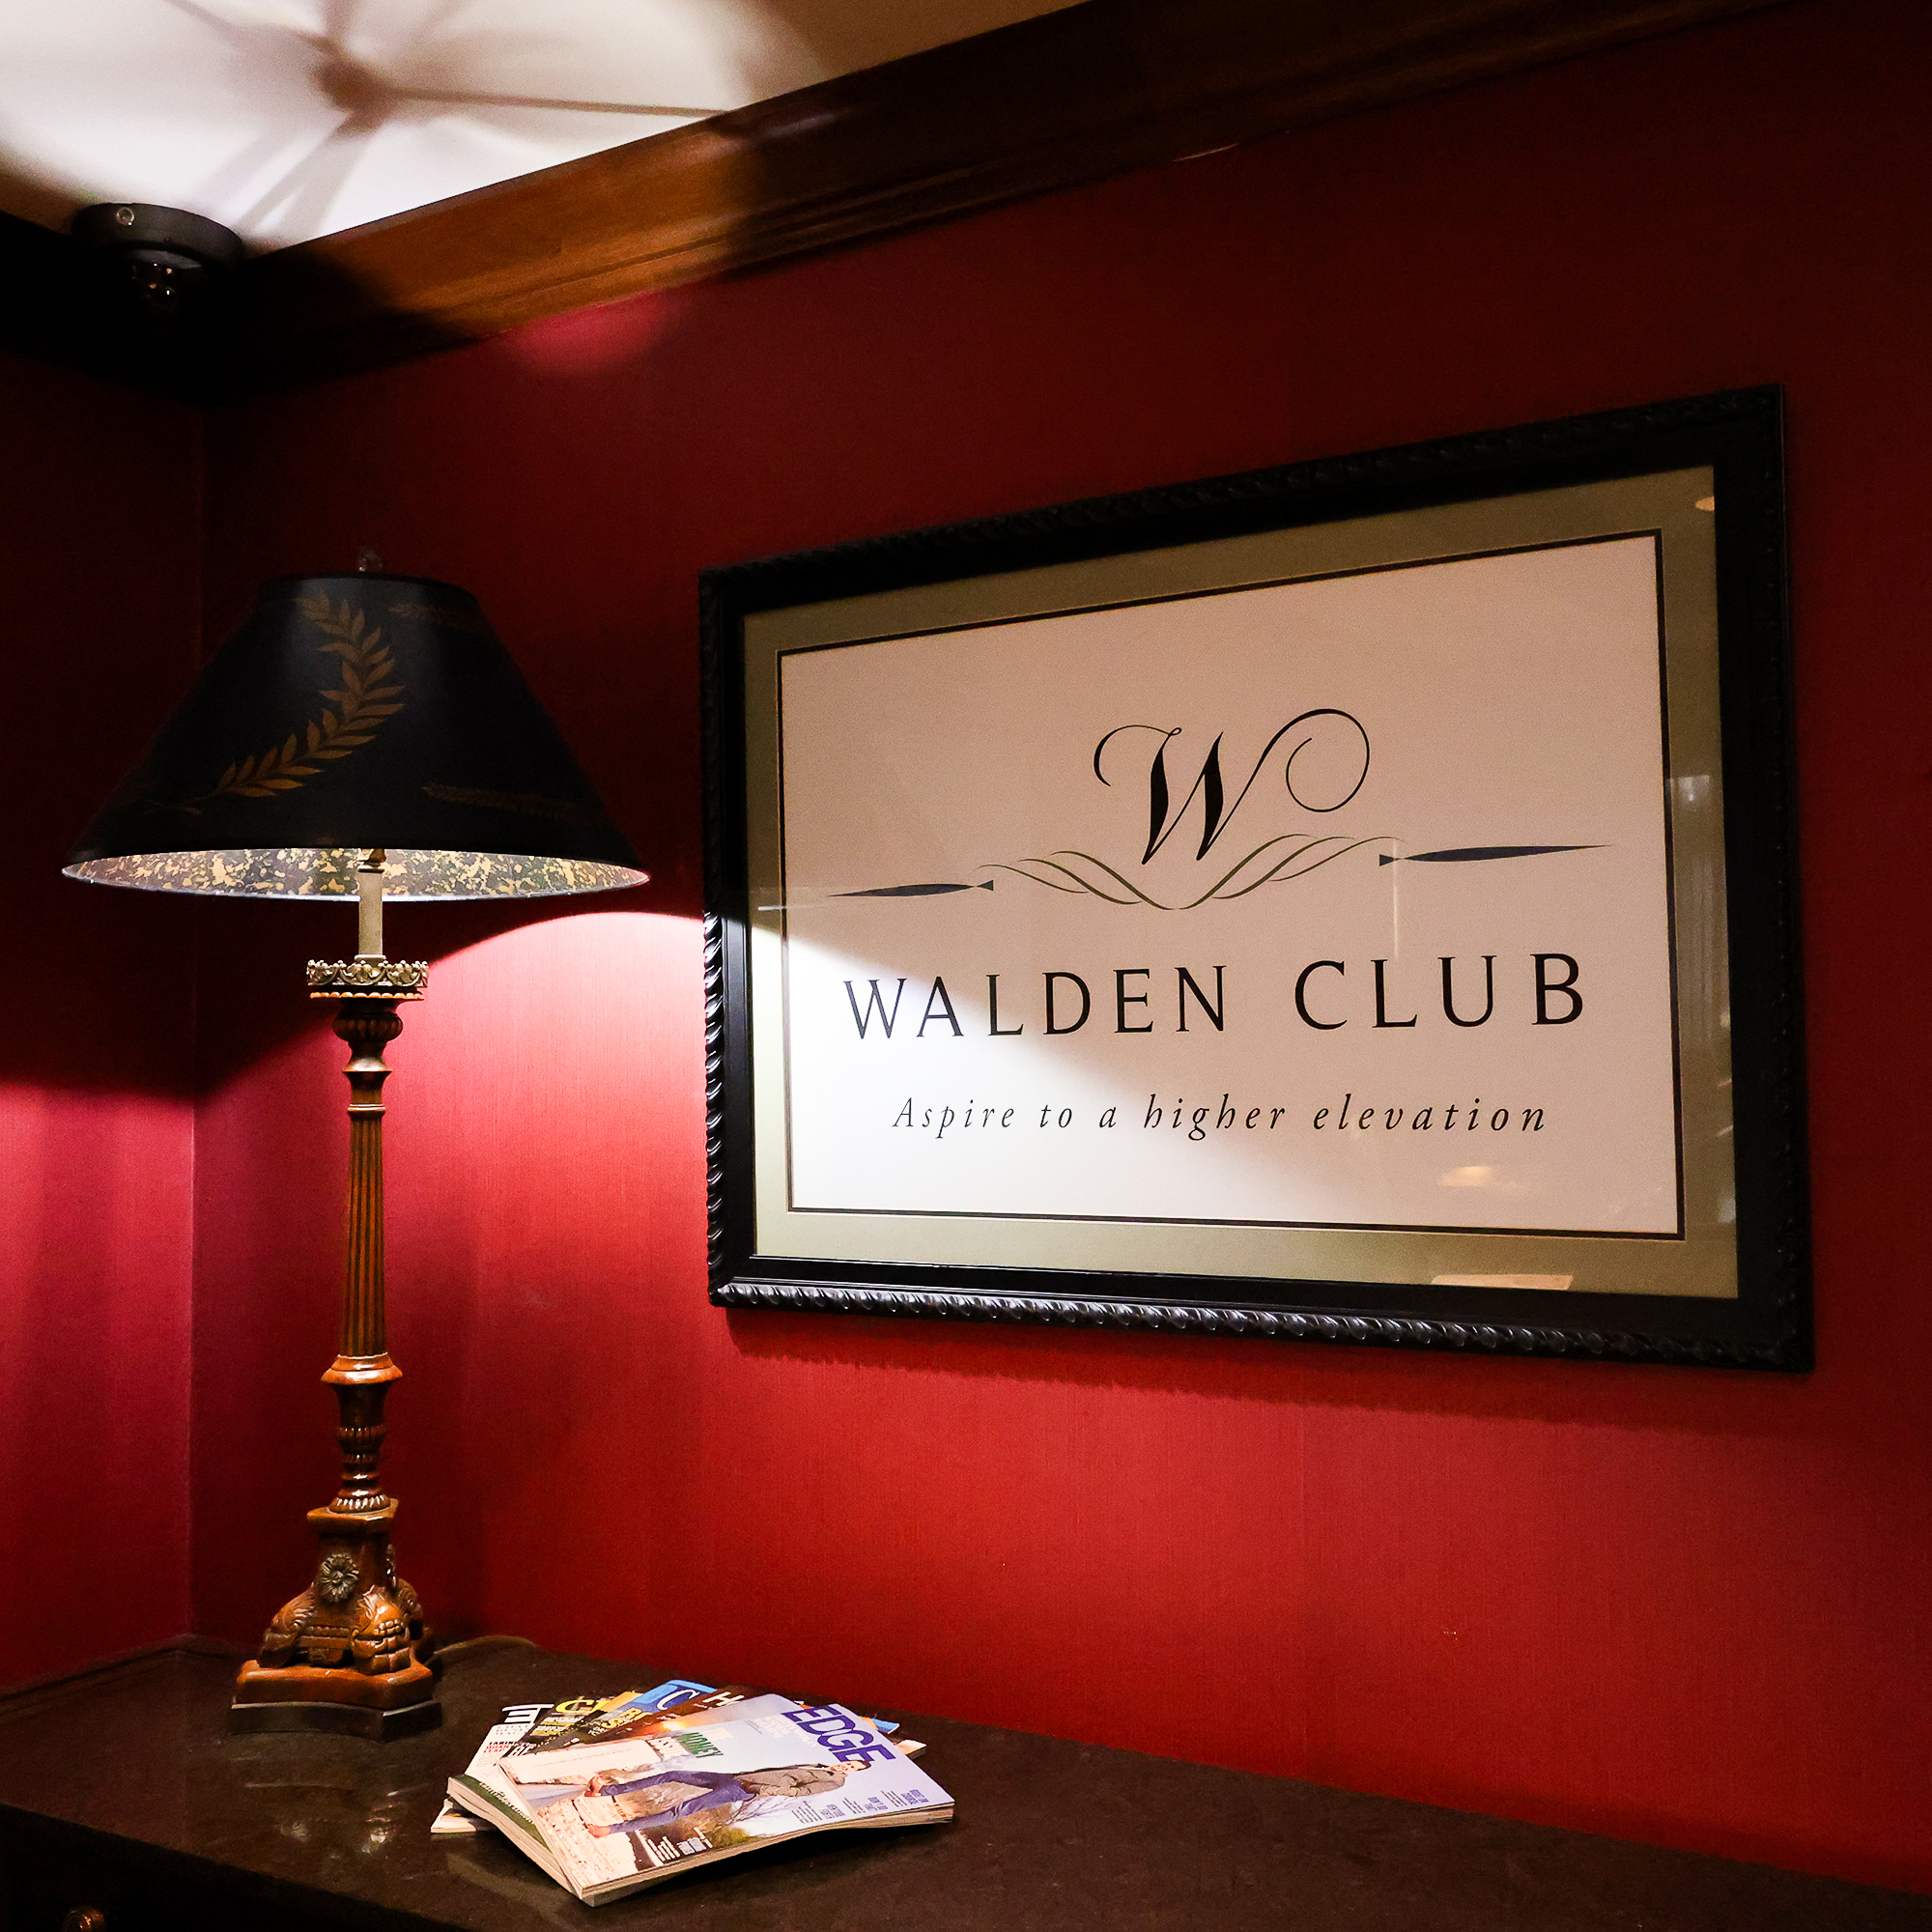 The Walden Club framed logo hanging on the lobby wall.